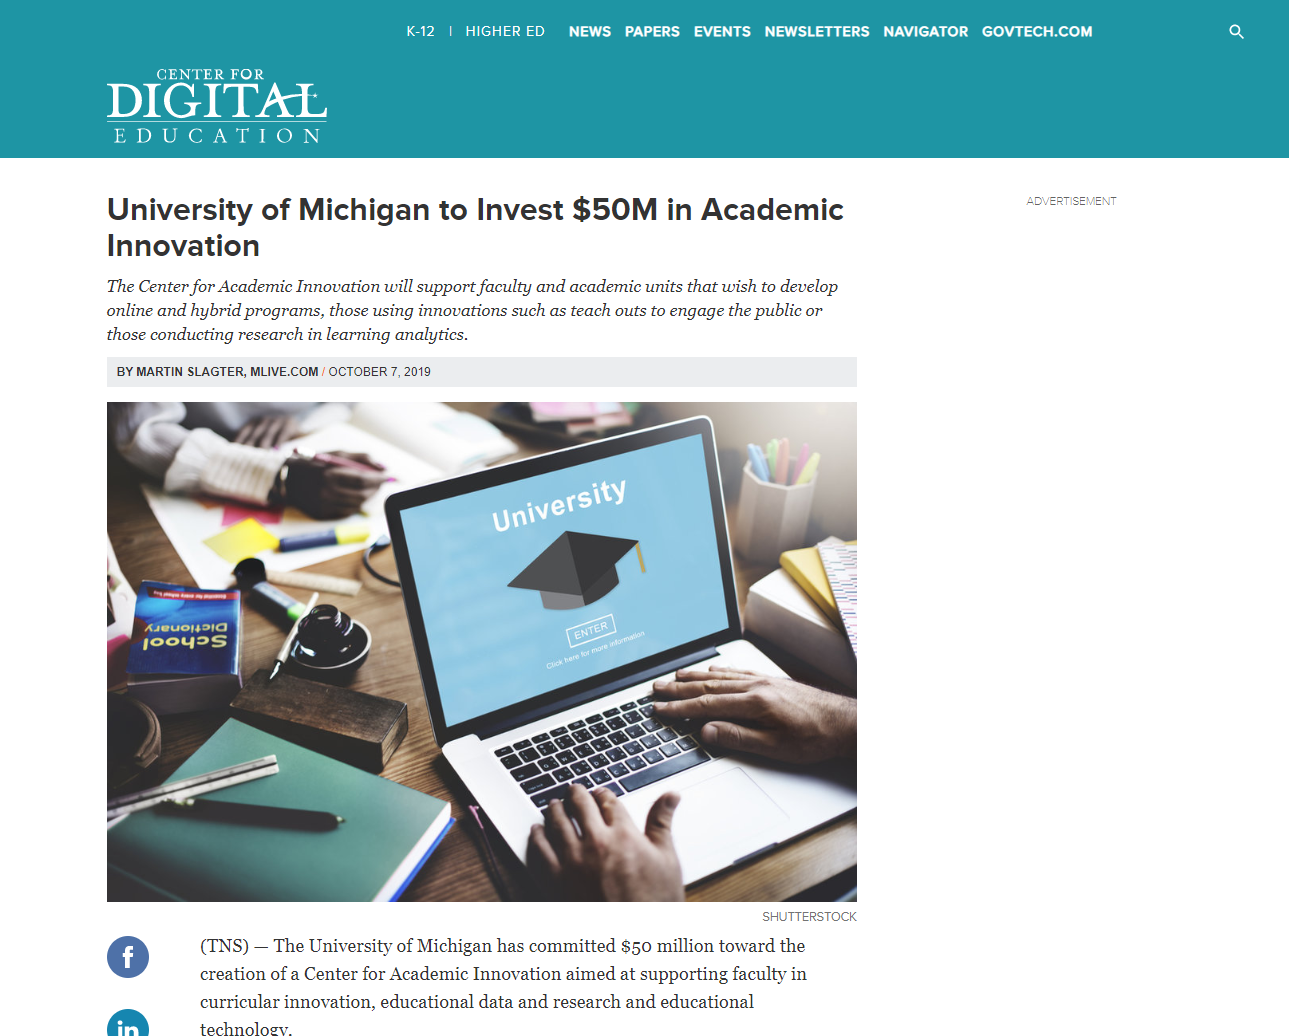 University of Michigan to Invest $50M in Academic Innovation